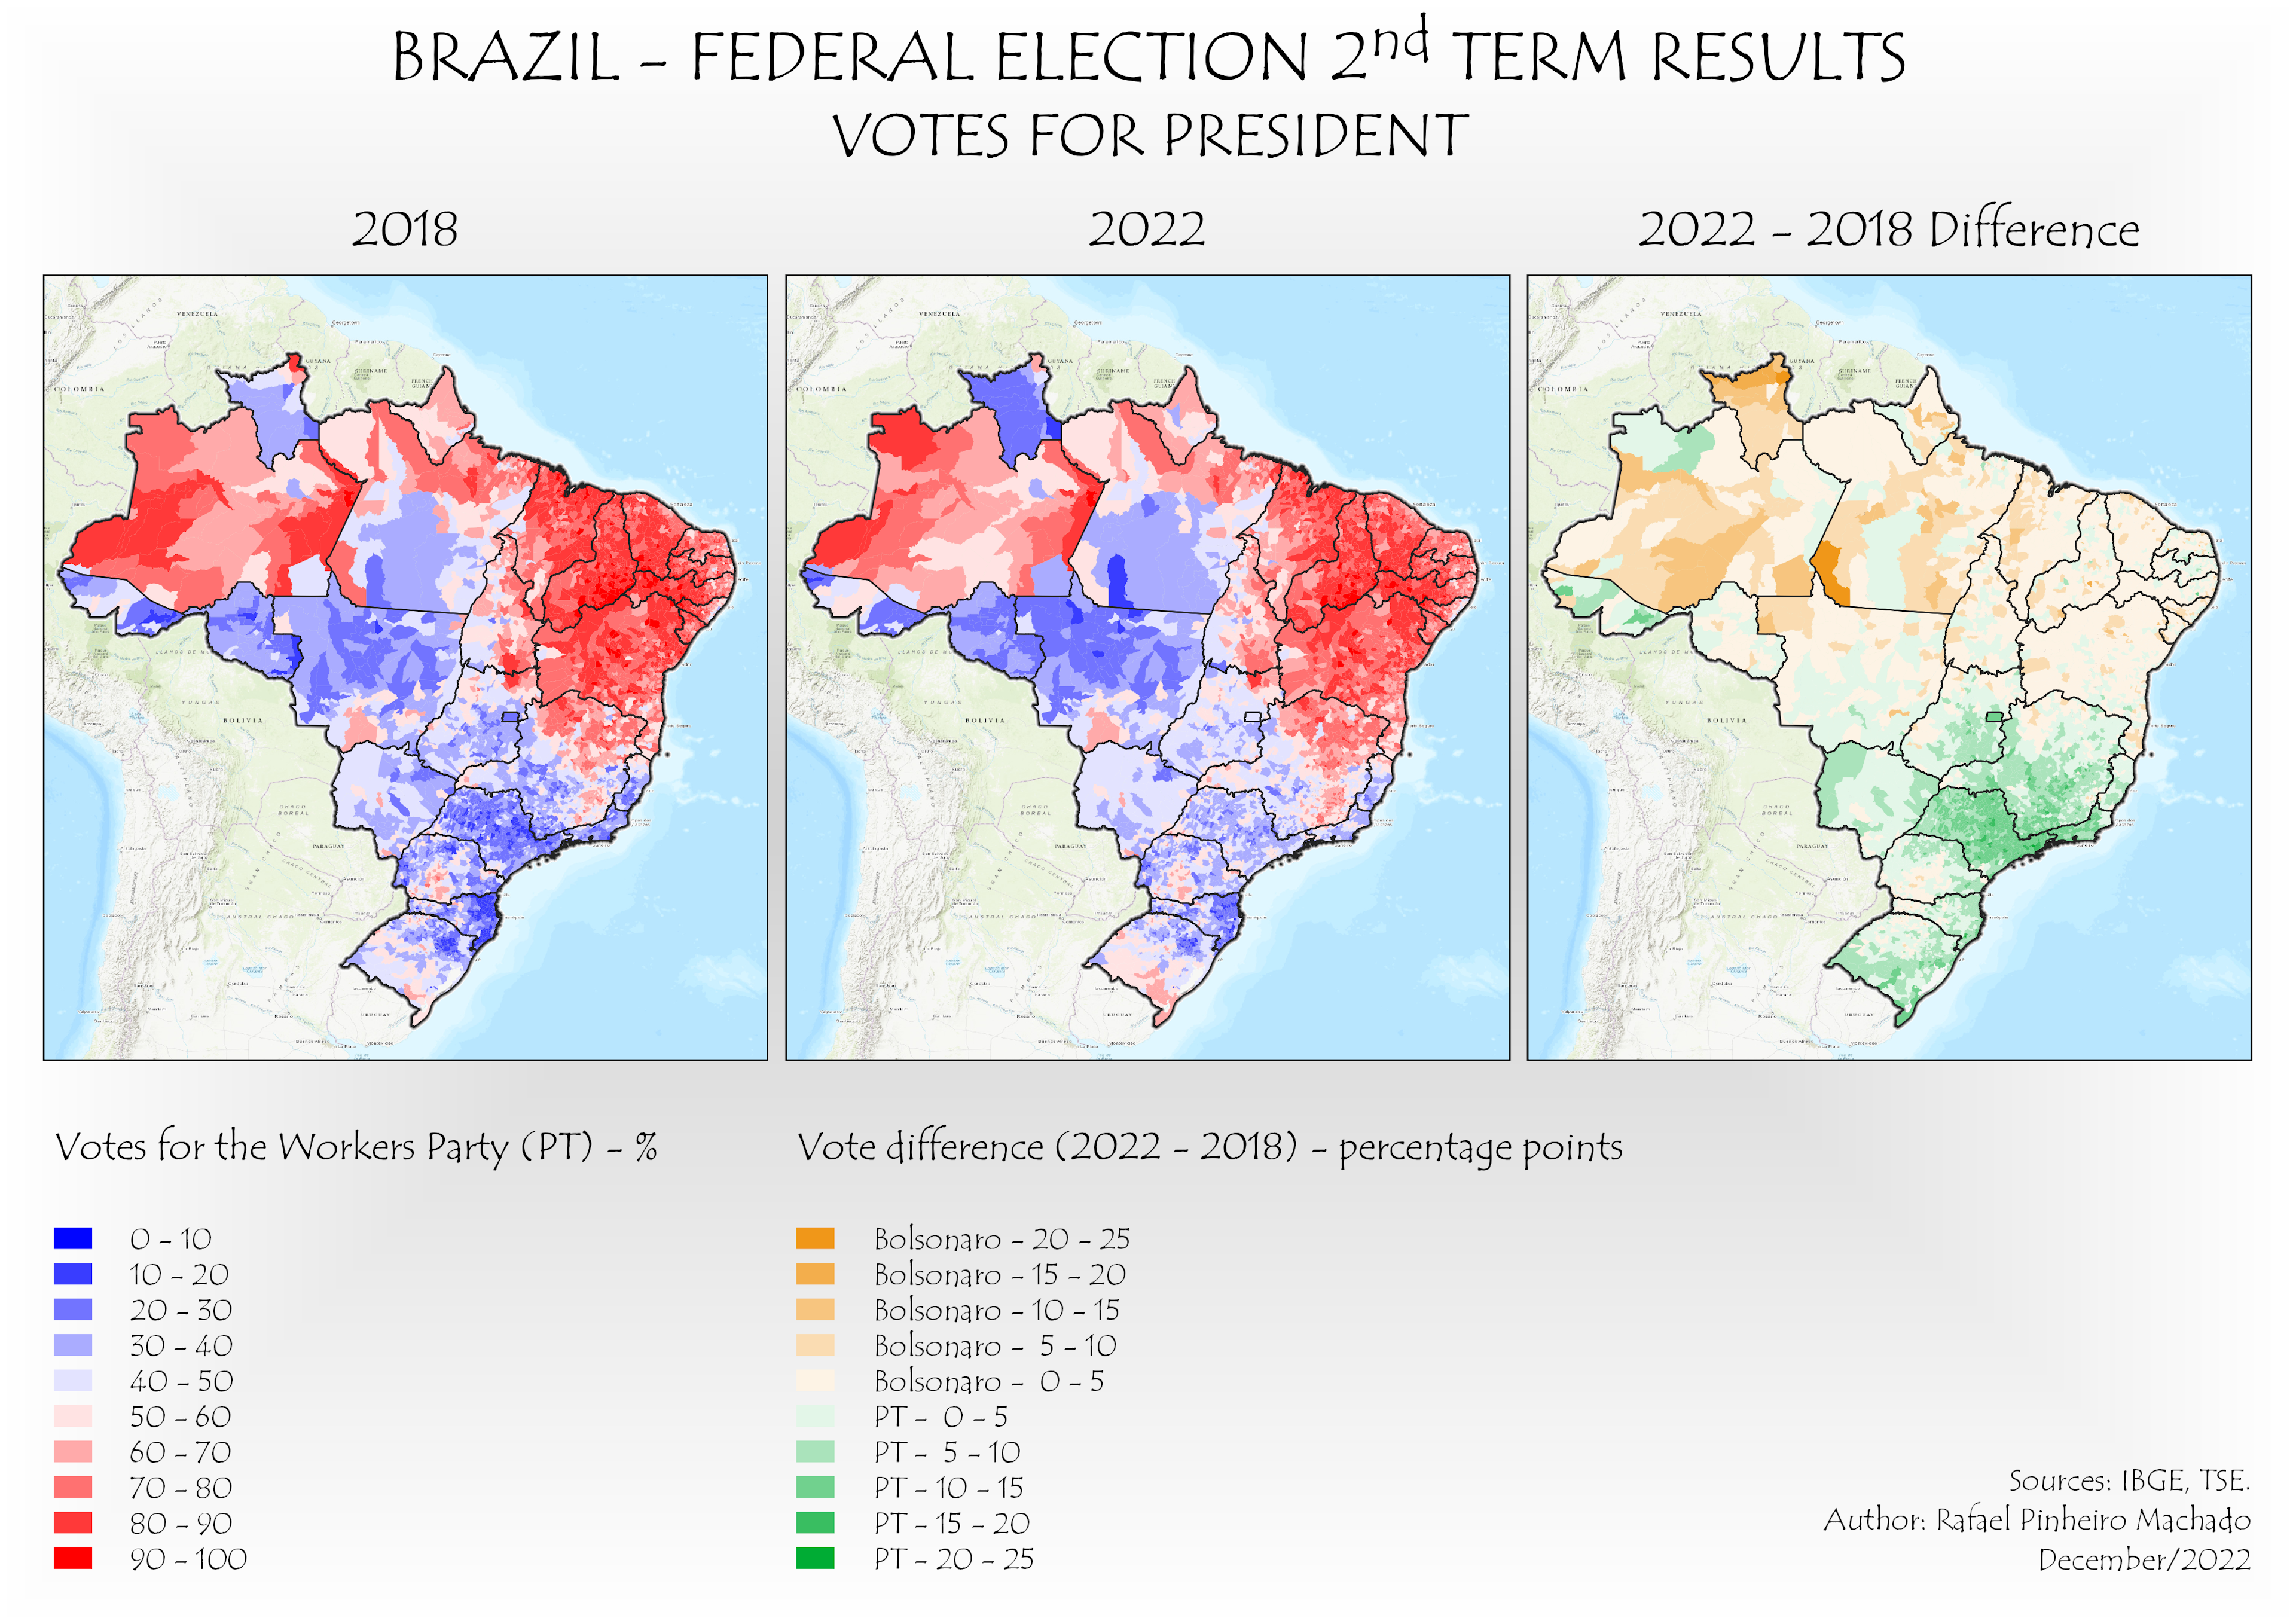 Brazil - Federal elections (2018 - 2022)